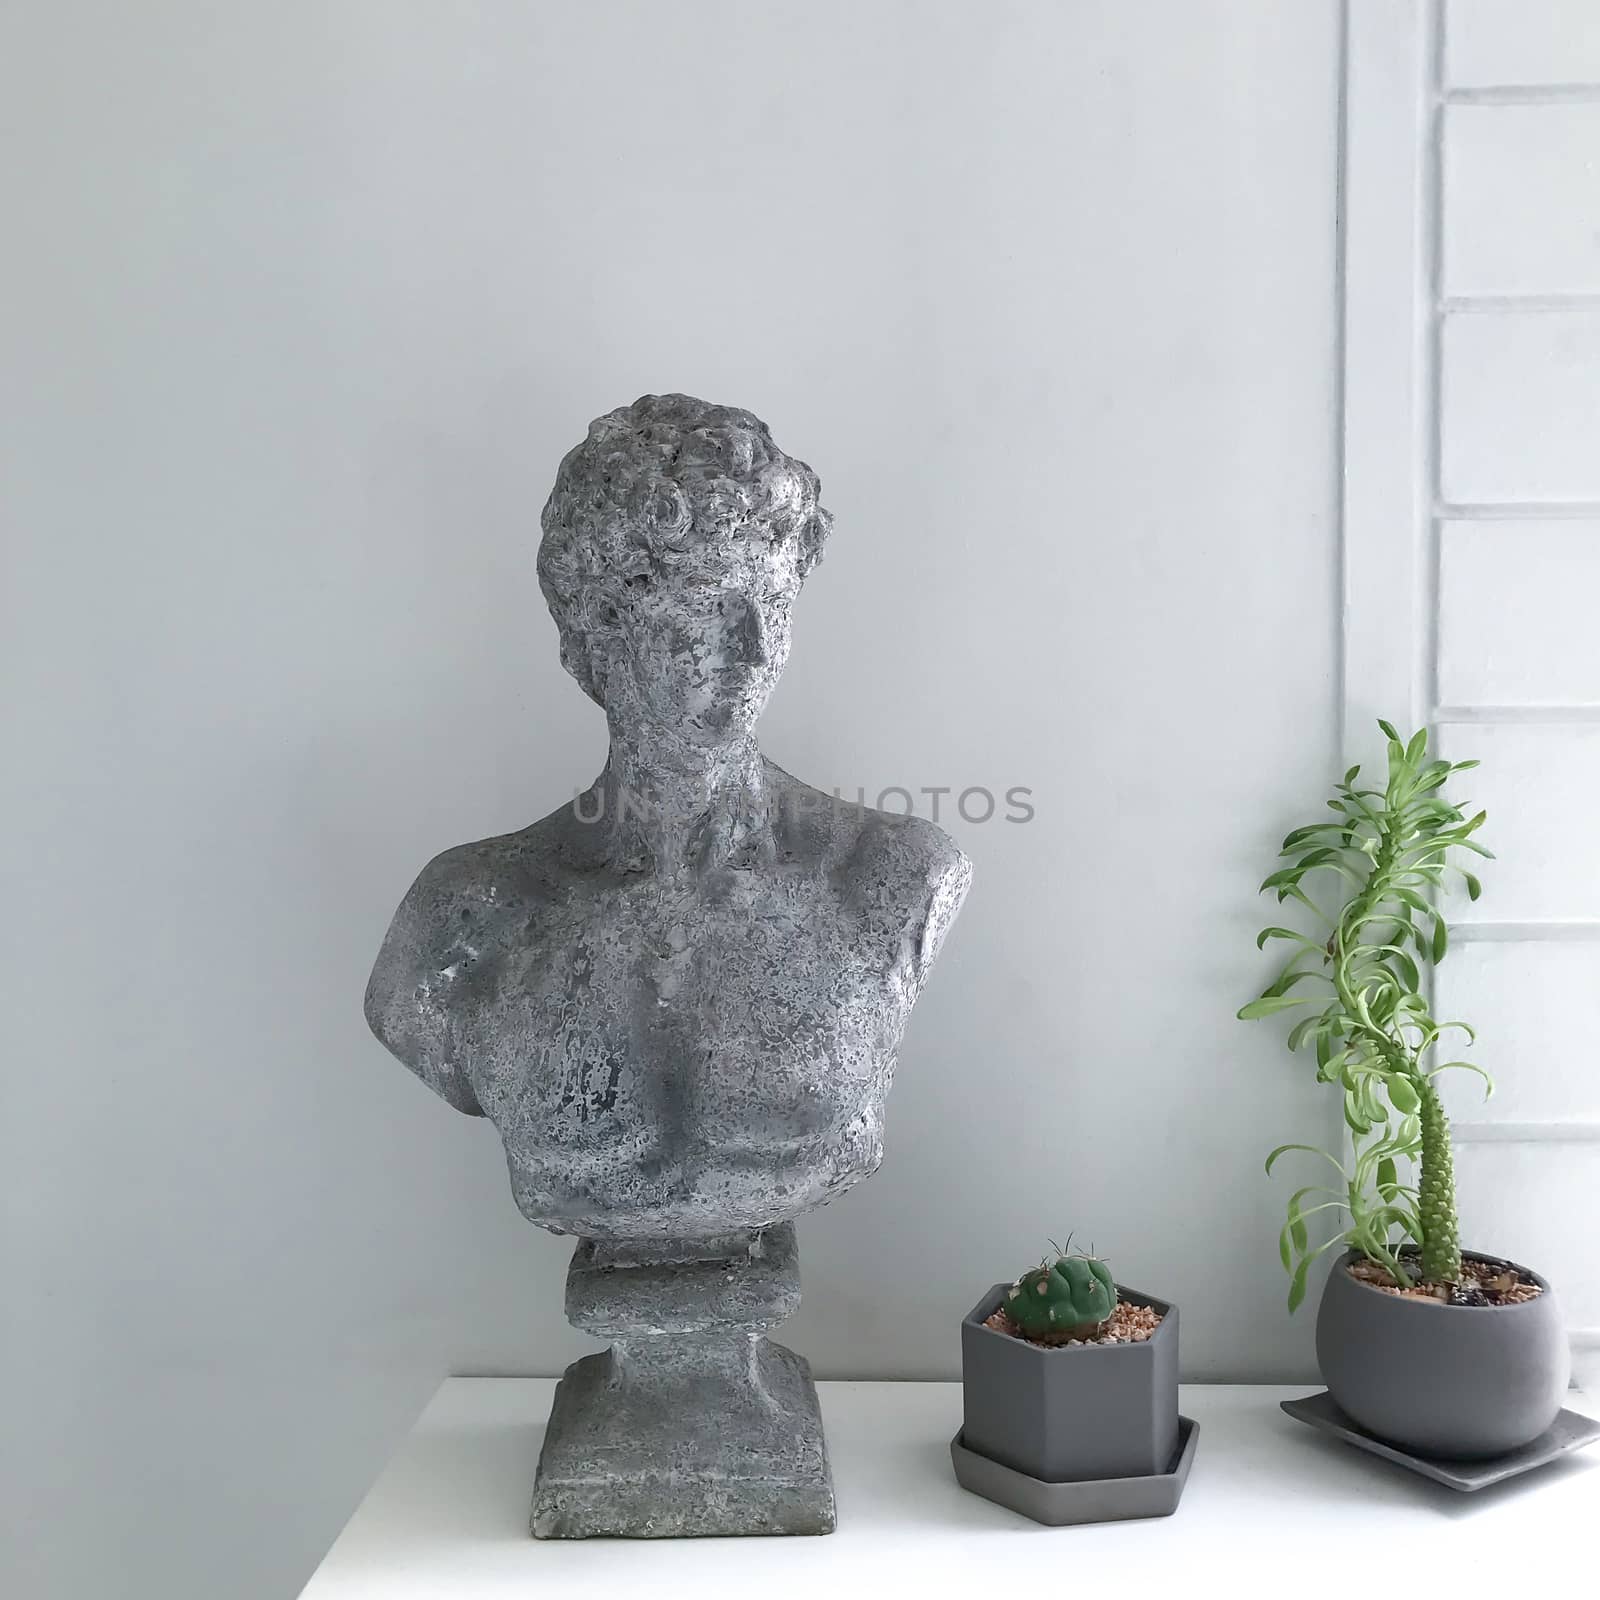 A half body of human stucco sculpture and cactus plant in concrete pots on white table on white wall background.